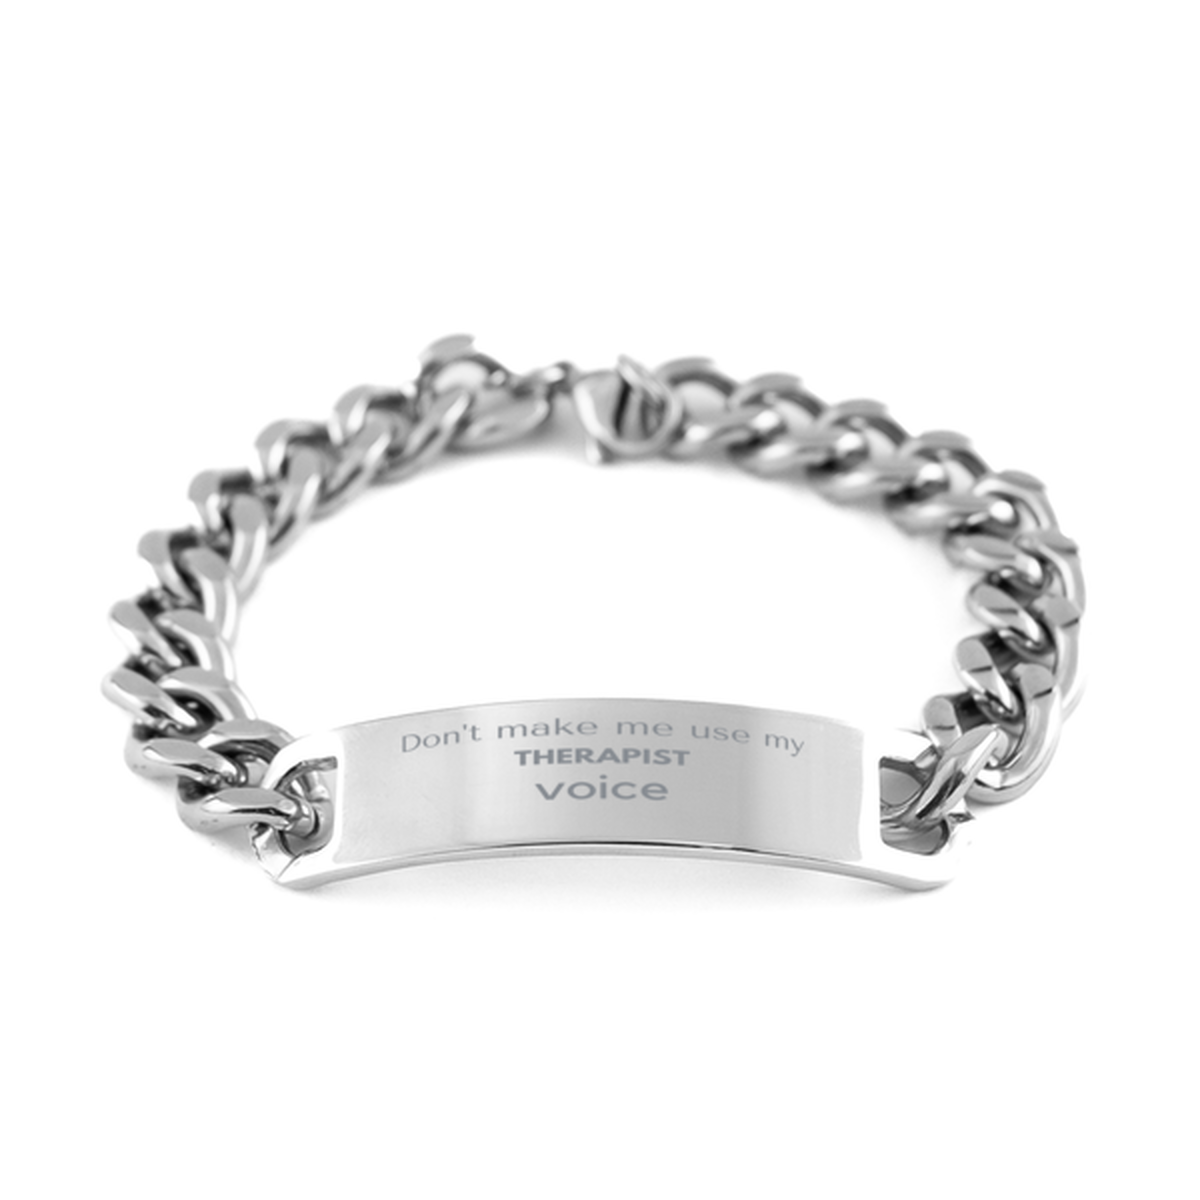 Don't make me use my Therapist voice, Sarcasm Therapist Gifts, Christmas Therapist Cuban Chain Stainless Steel Bracelet Birthday Unique Gifts For Therapist Coworkers, Men, Women, Colleague, Friends